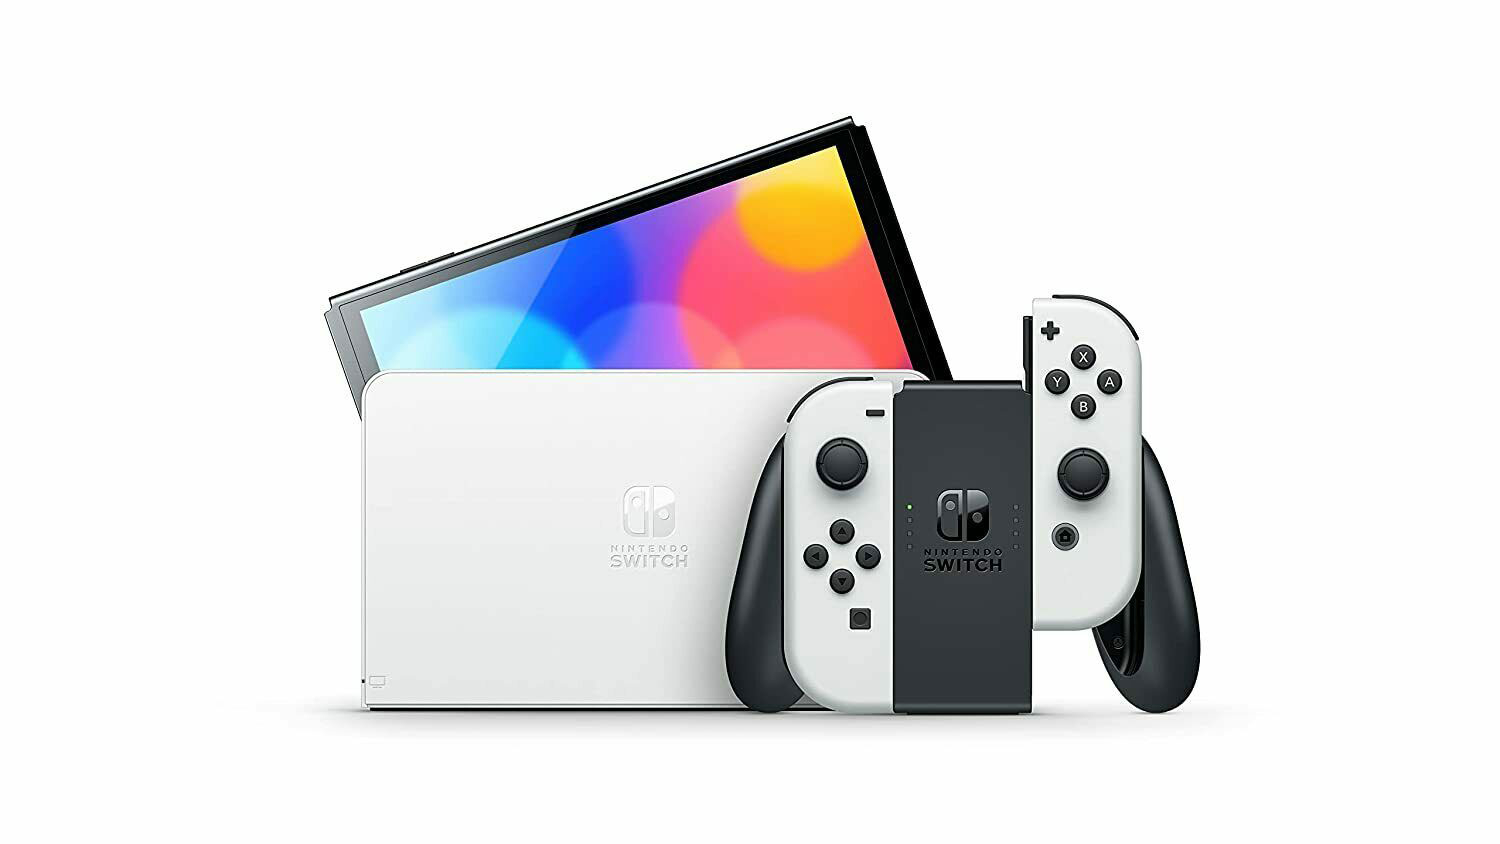 Grab £17 off the Nintendo Switch OLED at Amazon